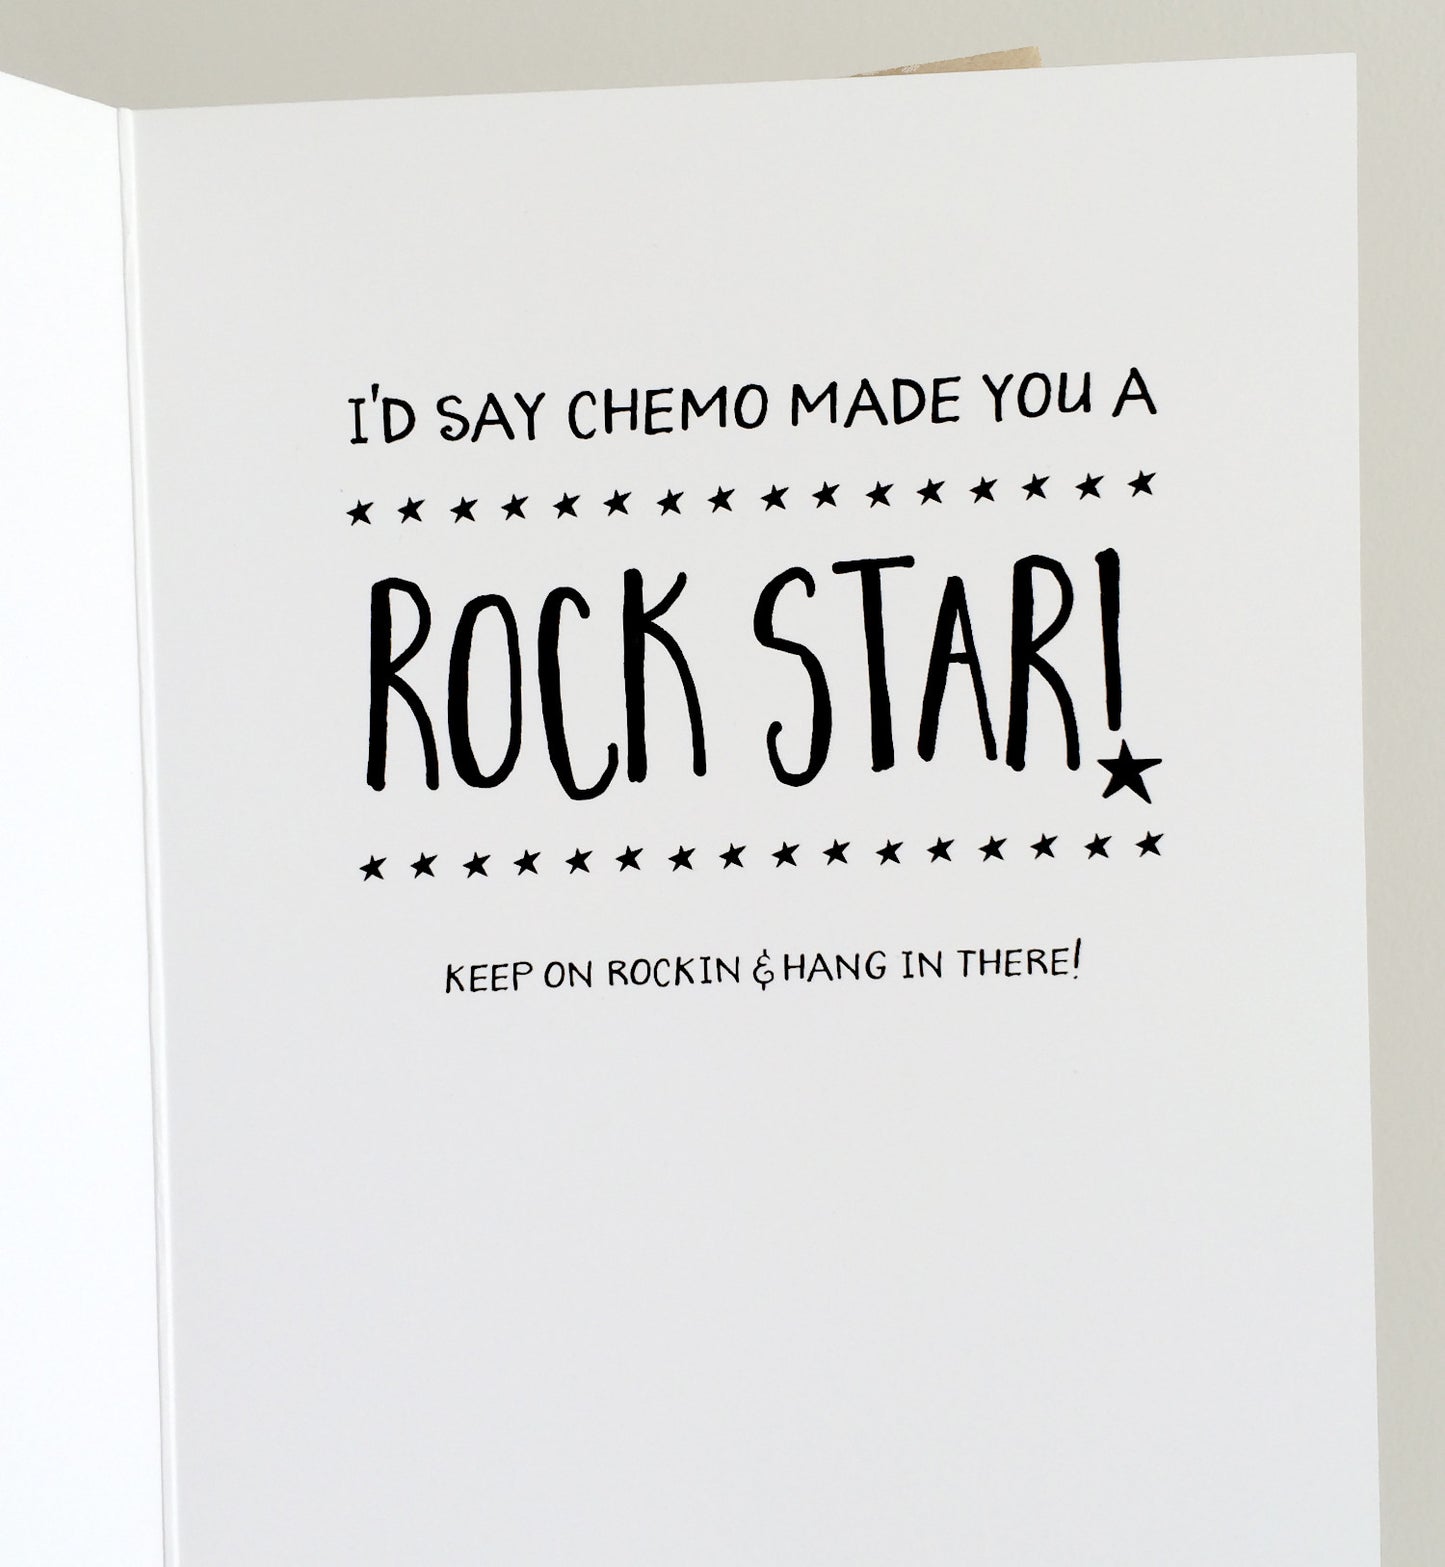 Inside of the greeting card that says "I'd say chemo made you a ROCK STAR! Keep on rockin & hang in there"